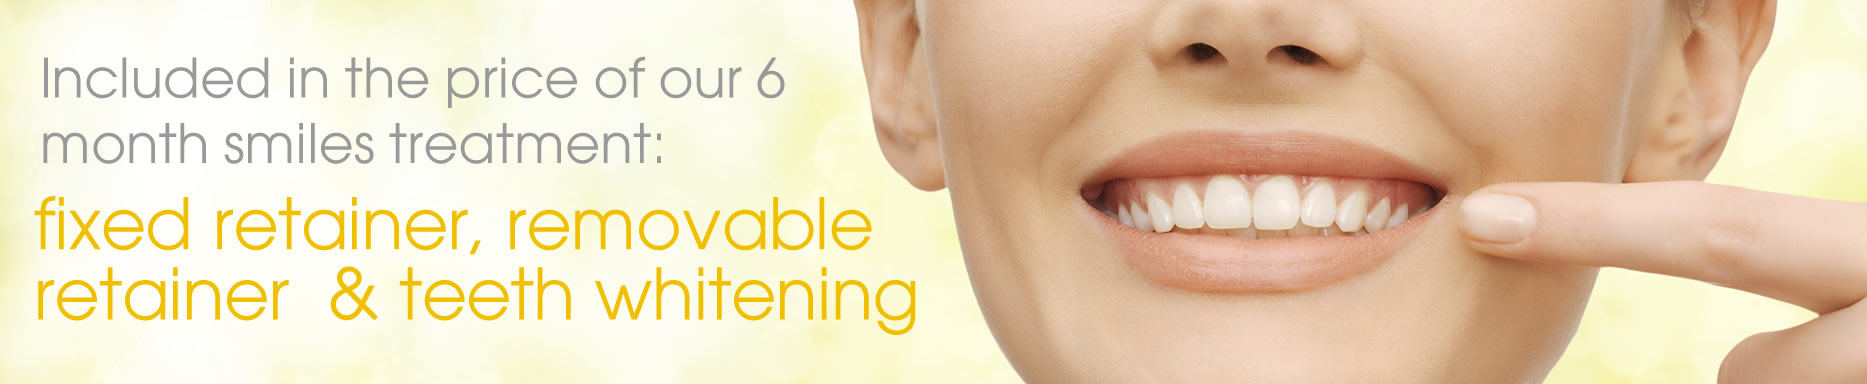 sim months smiles includes fixed retainer, removable retainer and tooth whitening